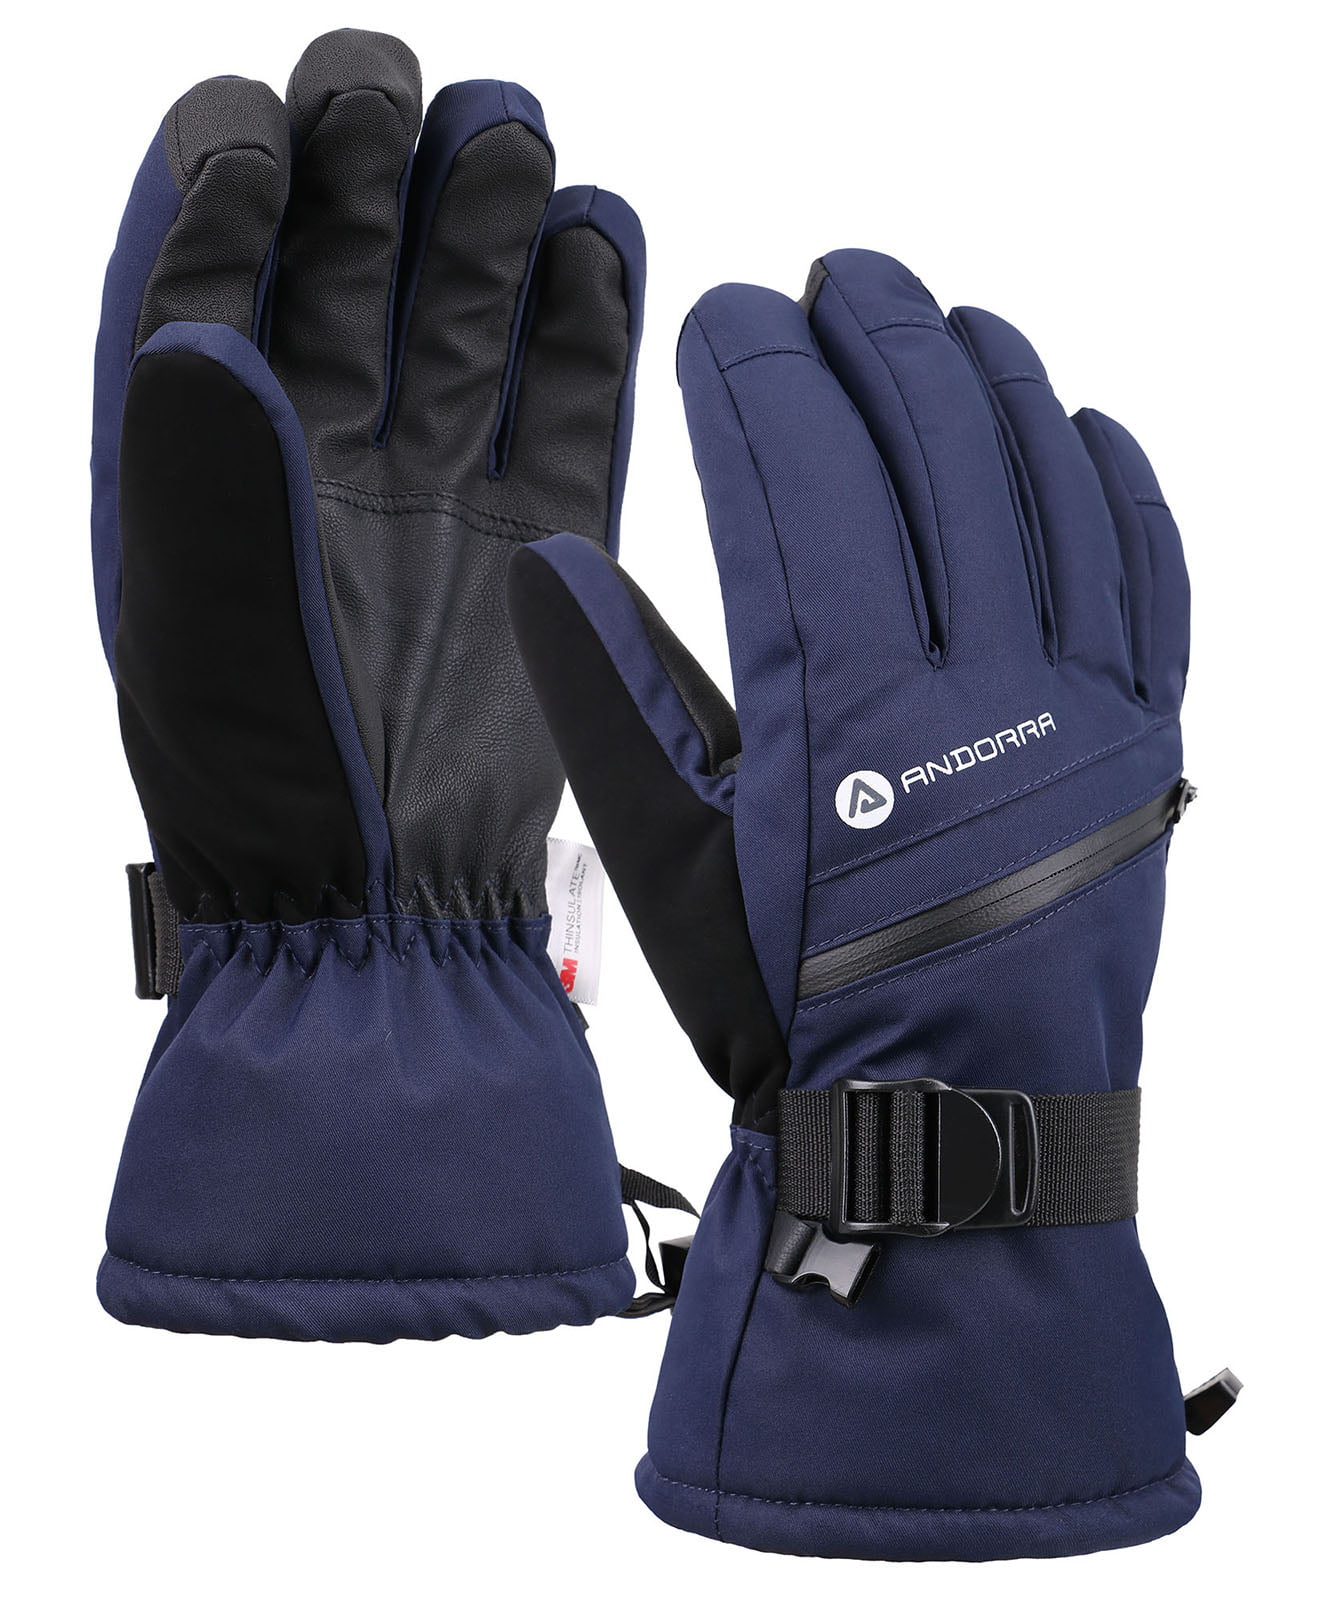 Men's Cross Country Textured Touchscreen Ski Glove with Zippered,Navy,S 